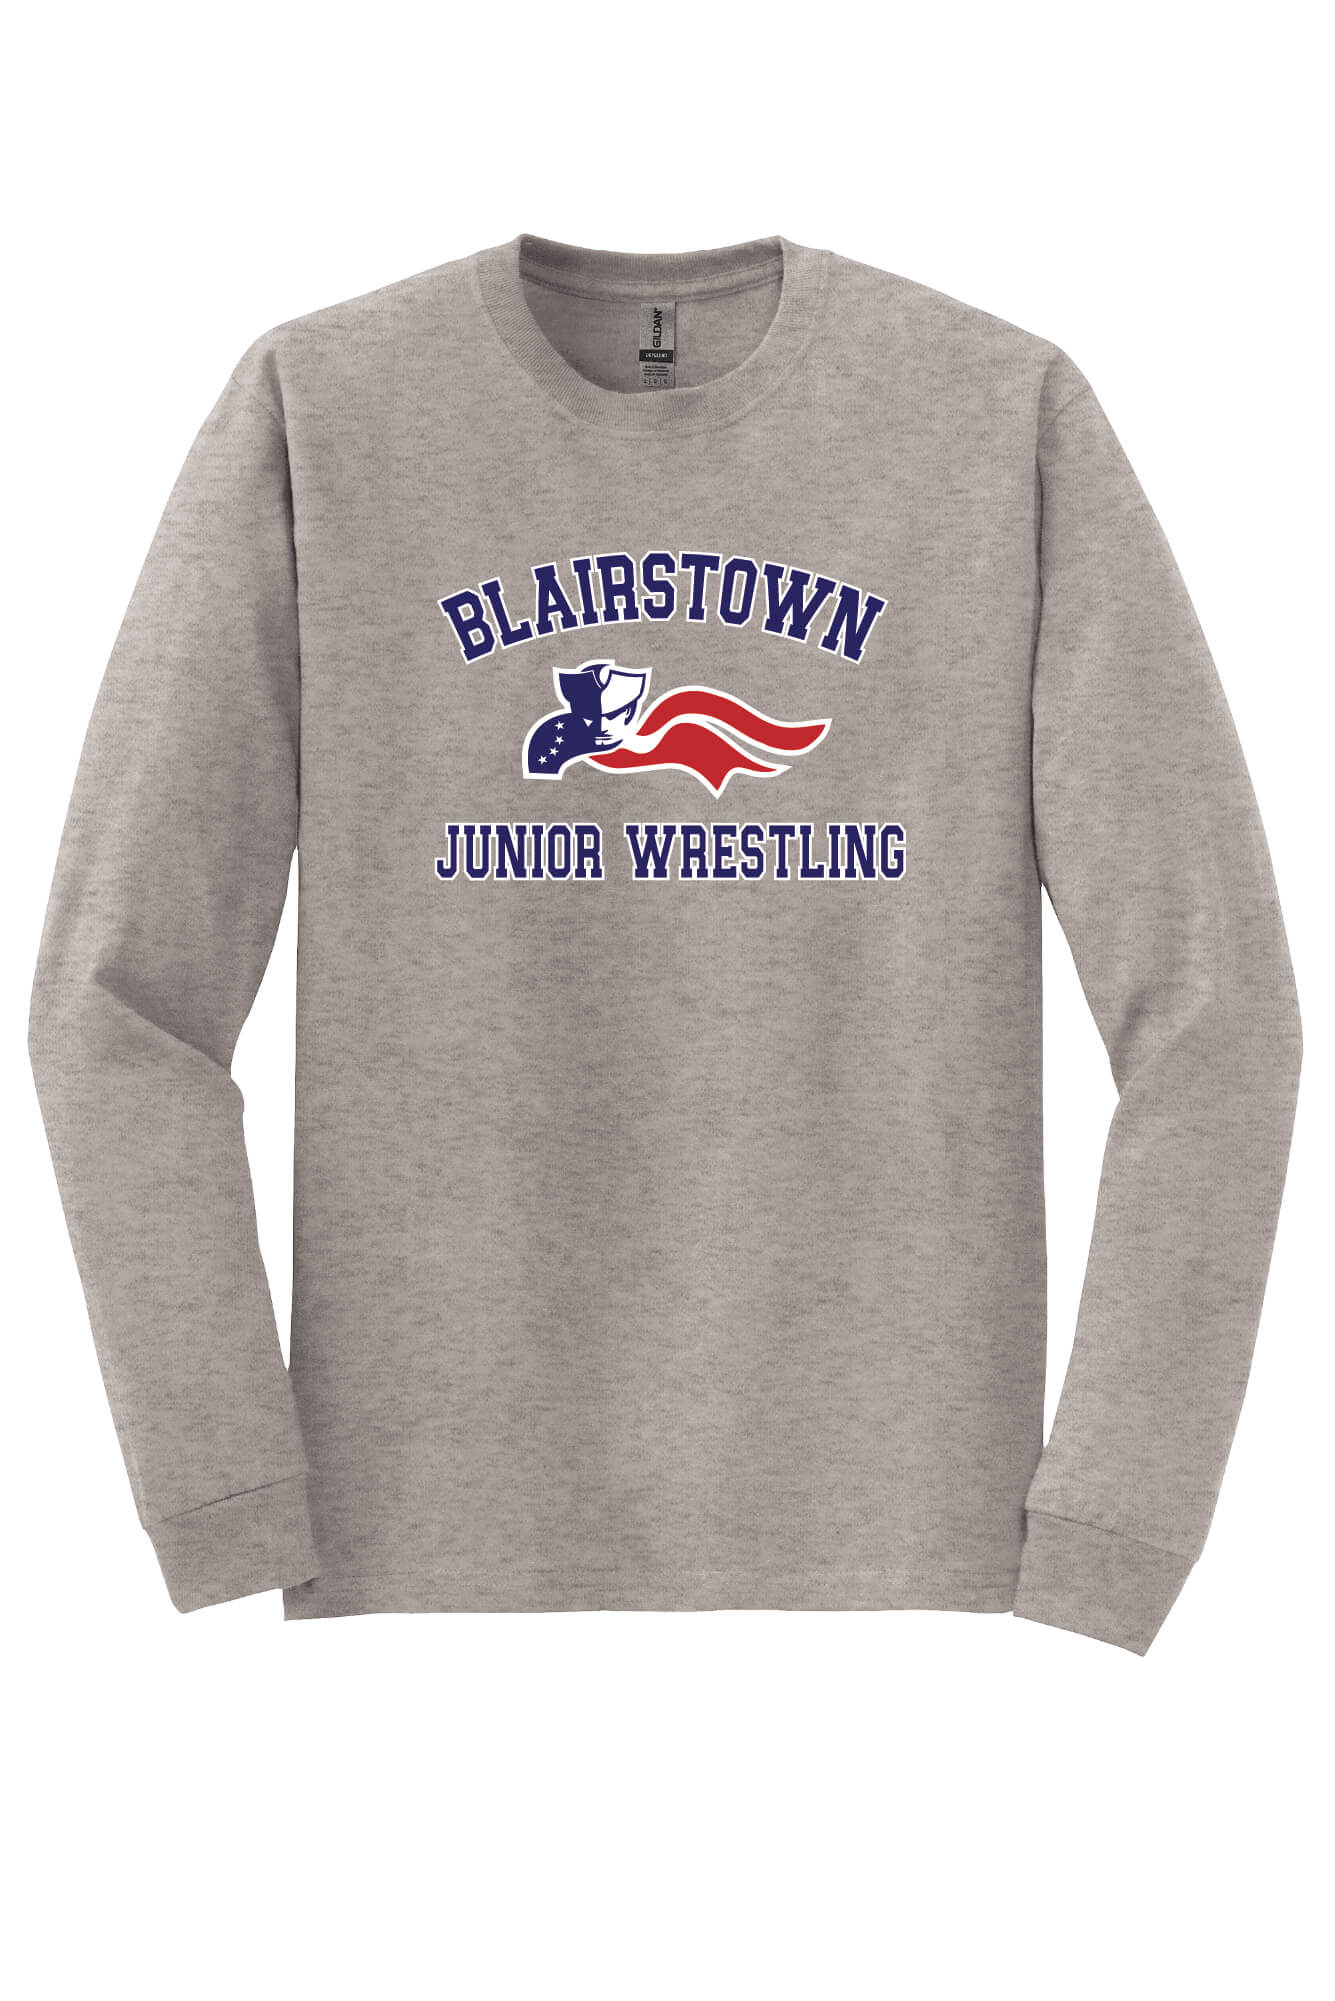 Blairstown JR Wrestling Long Sleeve T-Shirt (Youth) gray